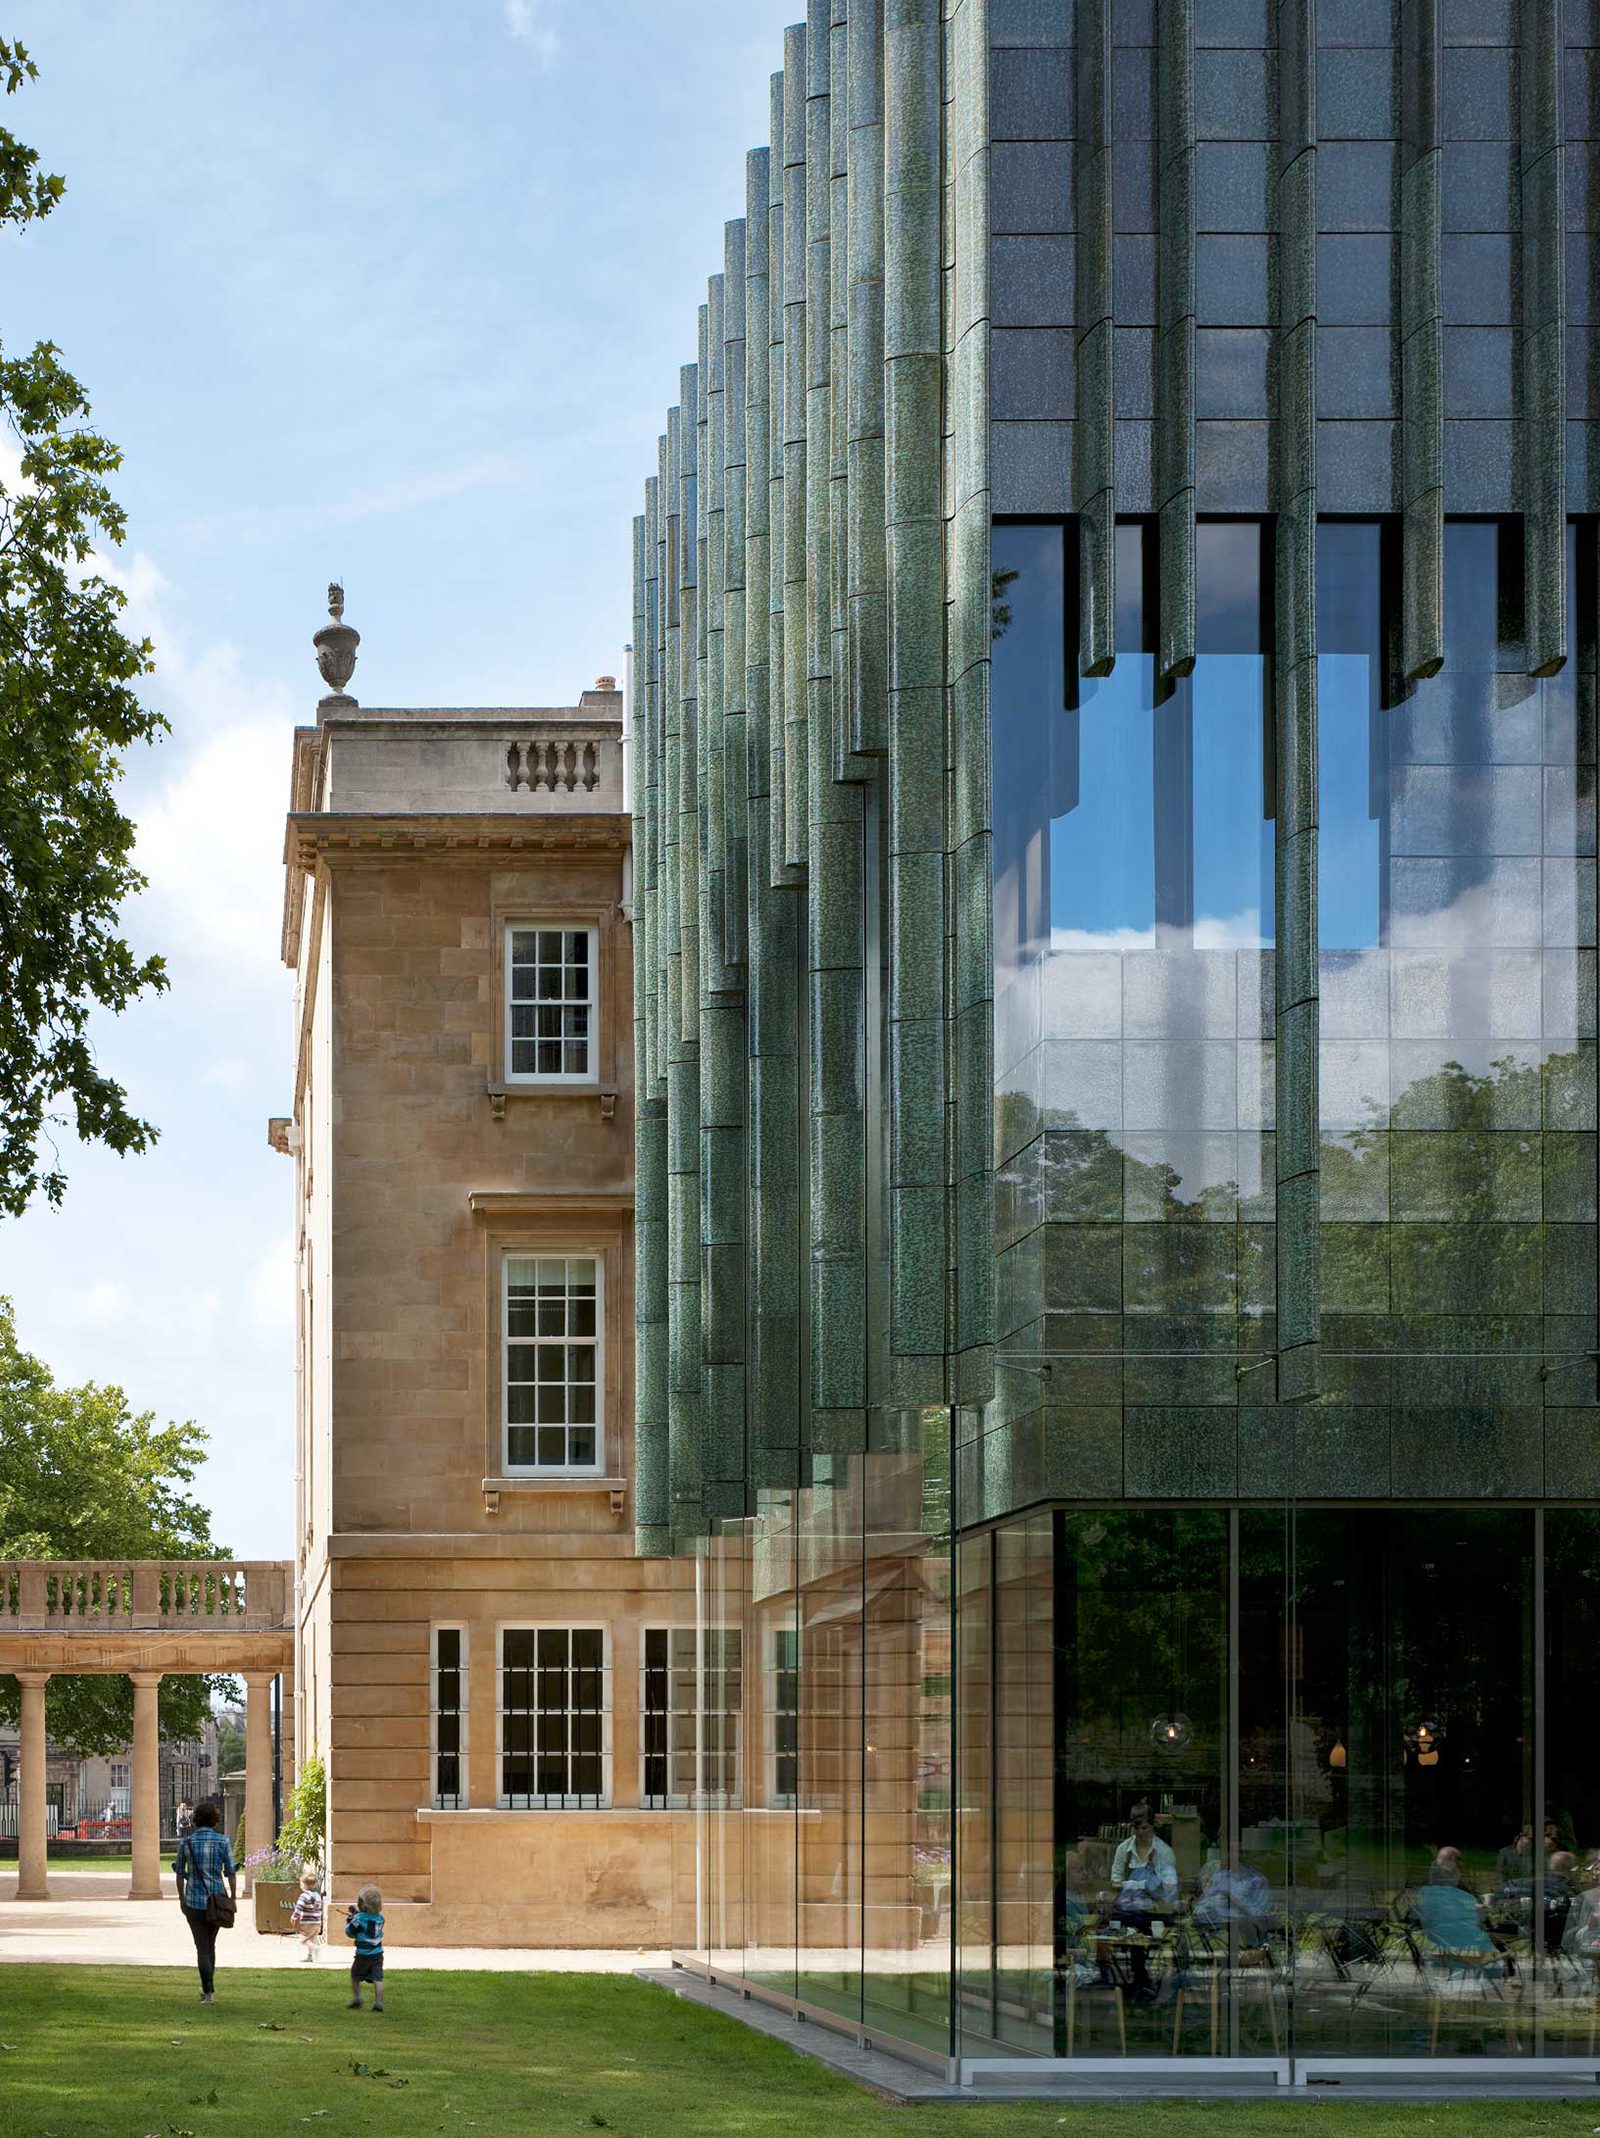 The Holburne Future Collective - The Holburne Museum